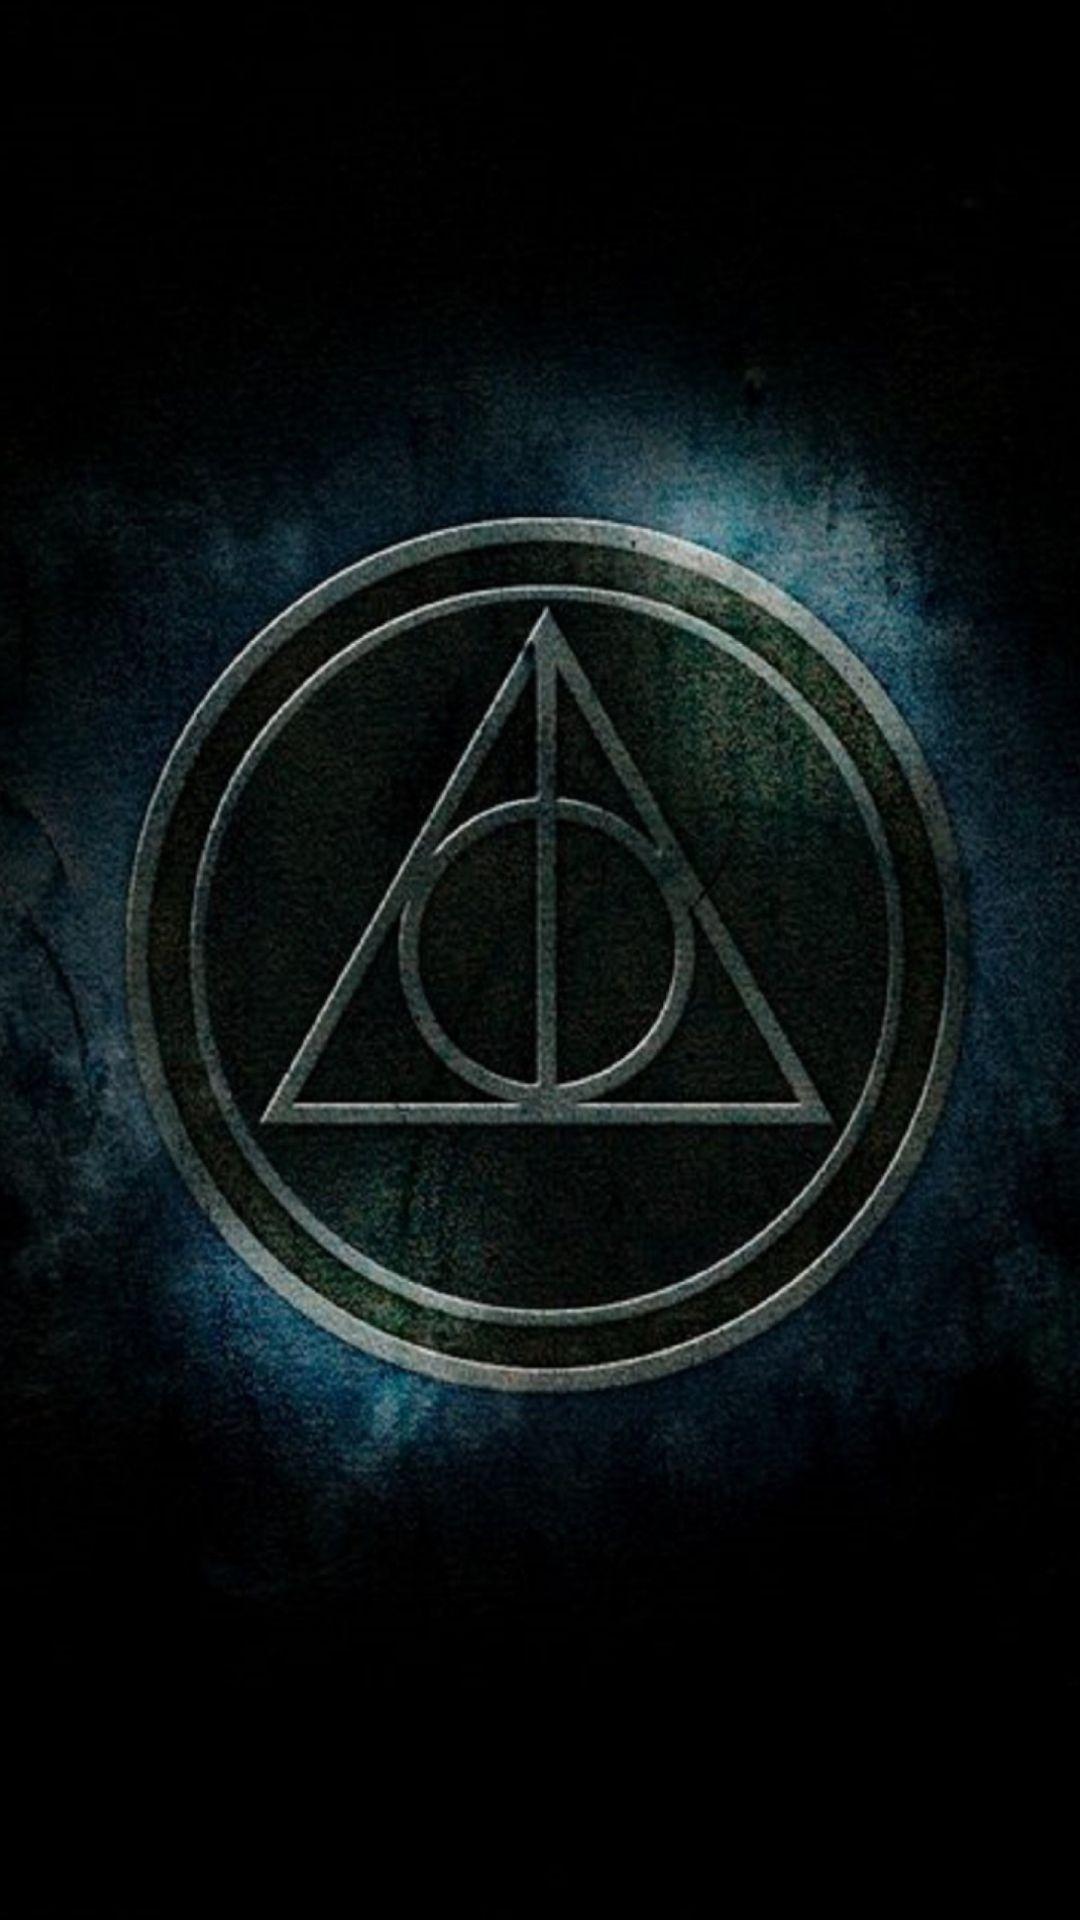 Harry Potter Deathly Hallows to see awesome Harry Potter fan